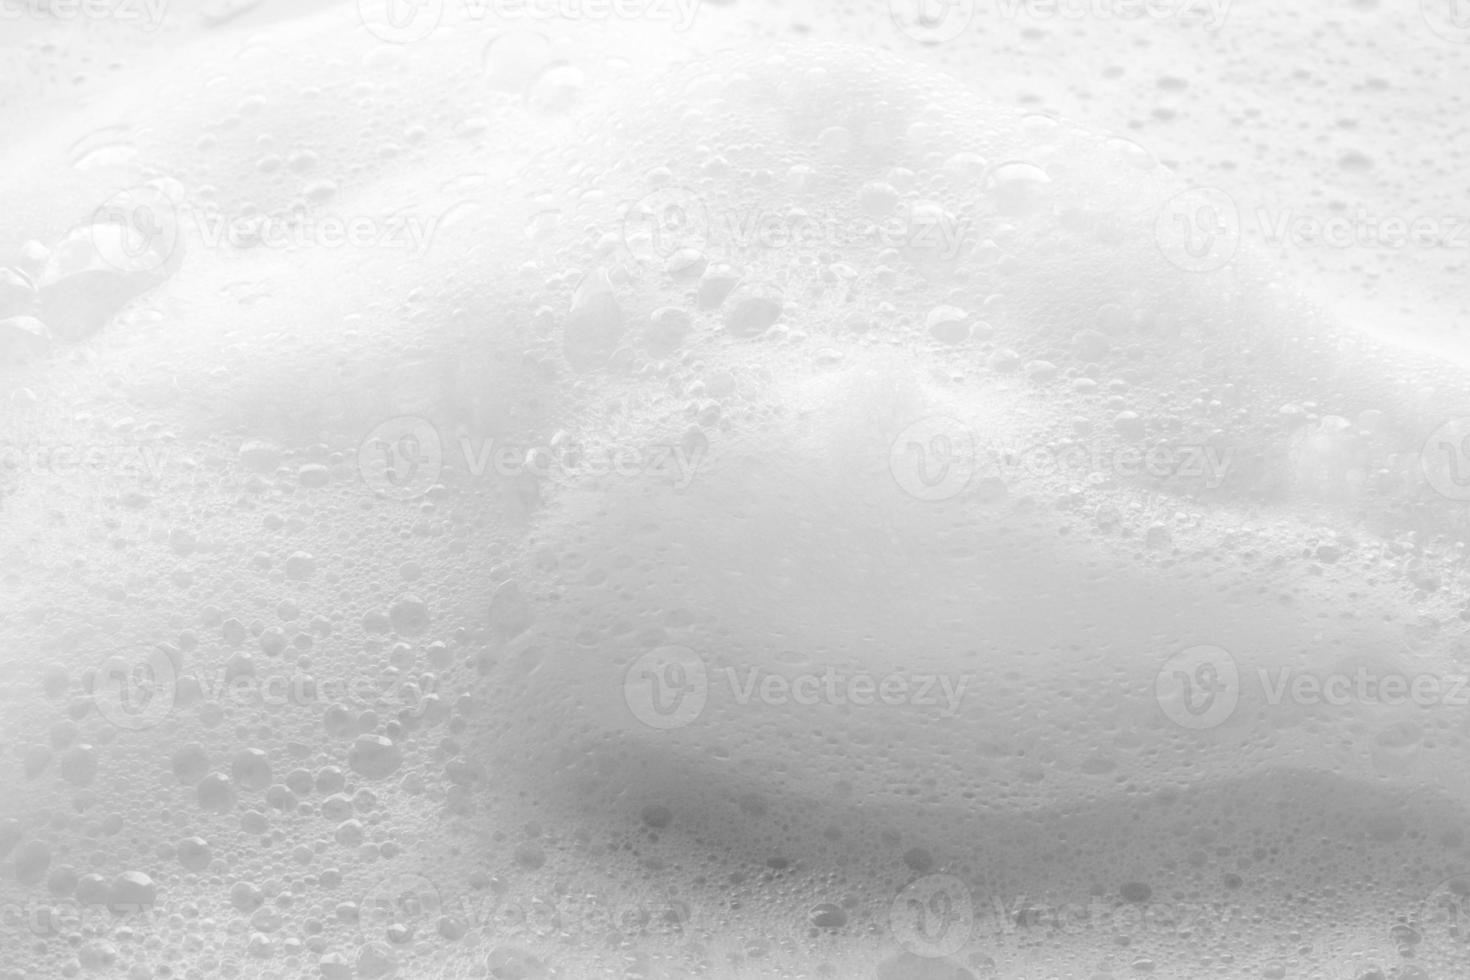 Abstract white soap foam bubbles texture background photo